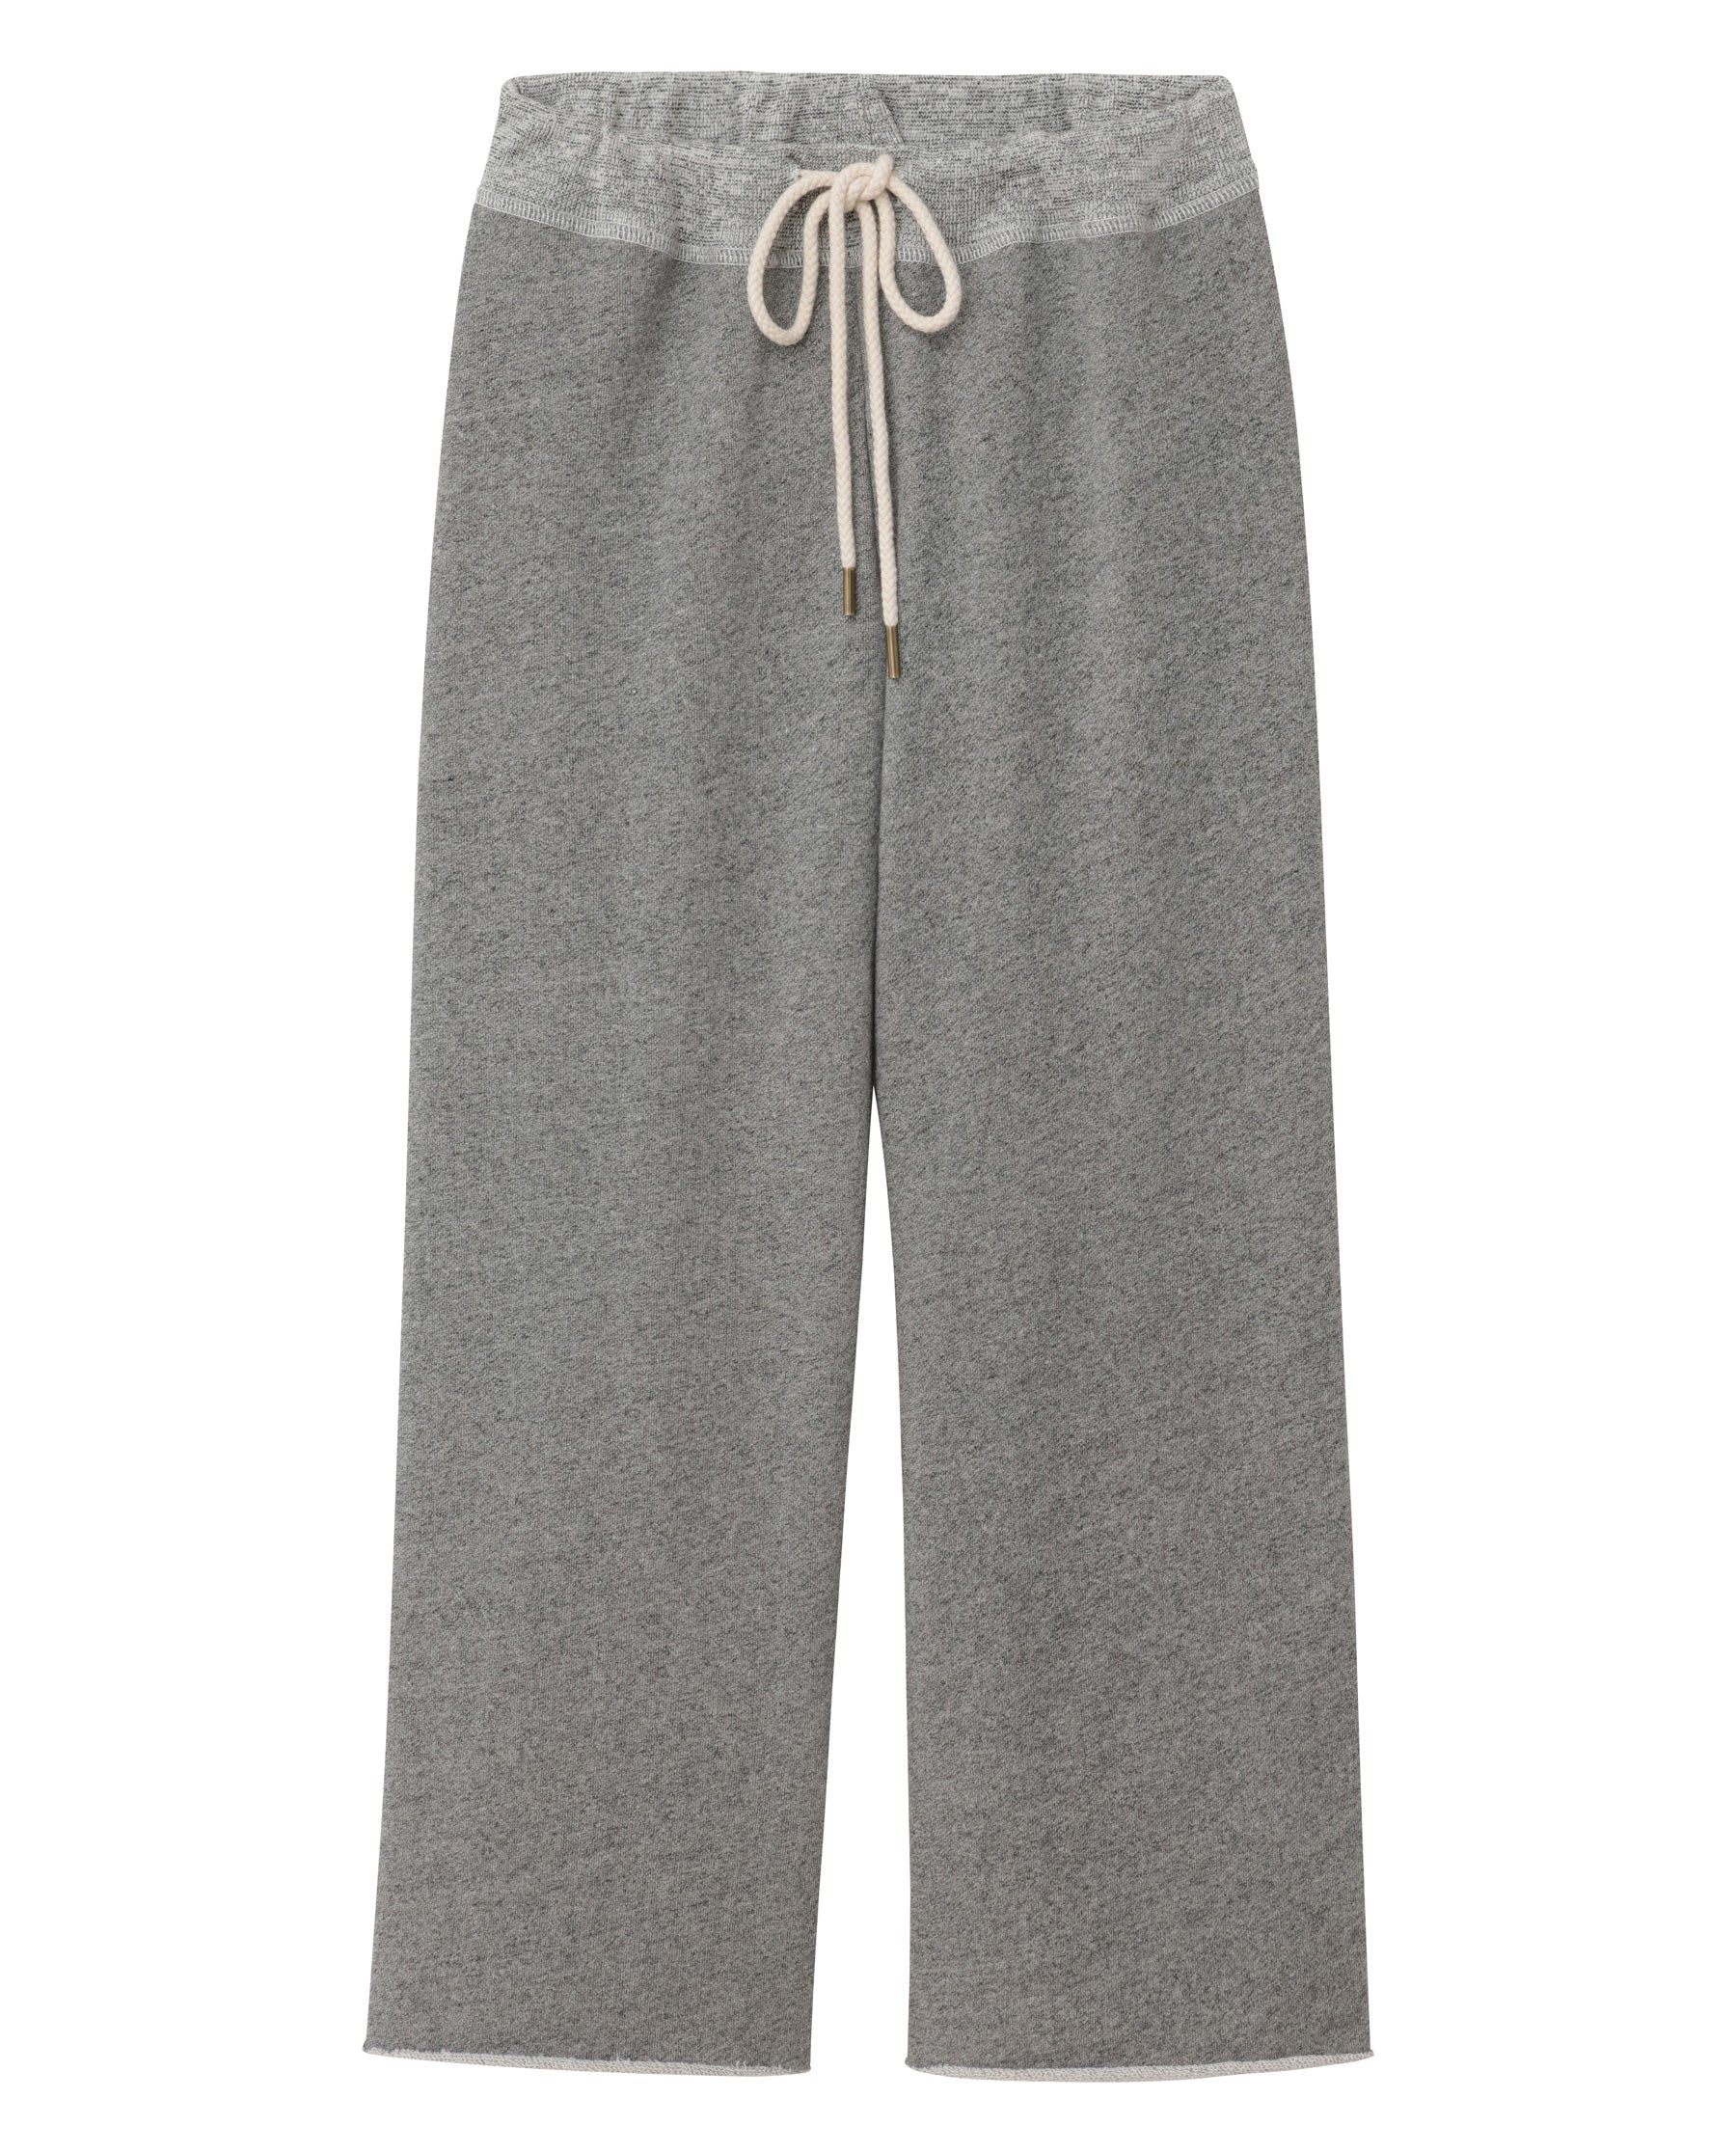 The Wide Leg Cropped Sweatpant. -- Varsity Grey SWEATPANTS THE GREAT. CORE KNITS